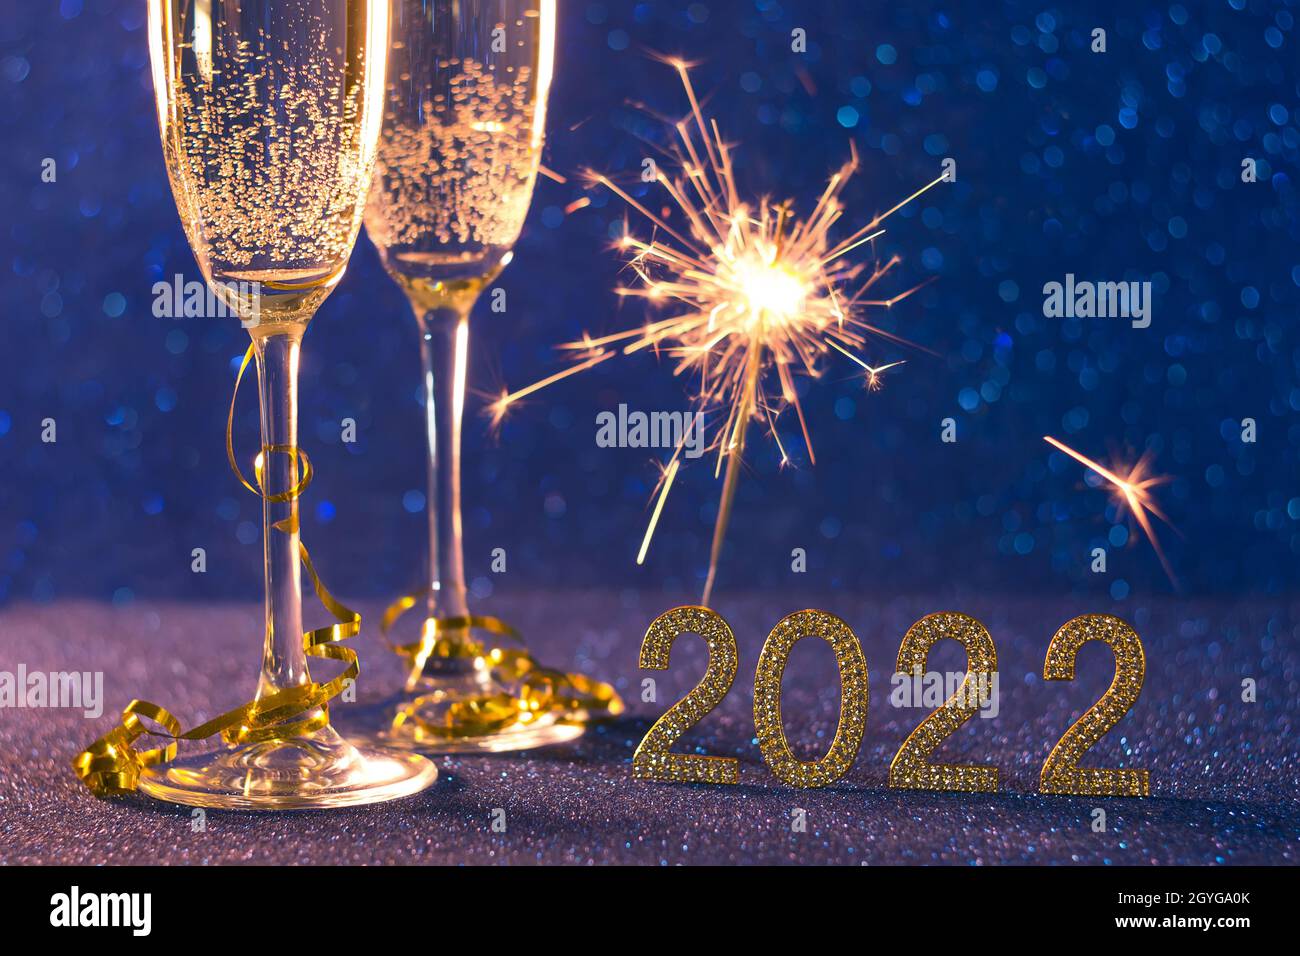 Happy new year 2022 .Christmas and New Year holiday background with two cups, a glass of champagne and sparklers on a blue background with bokeh Stock Photo